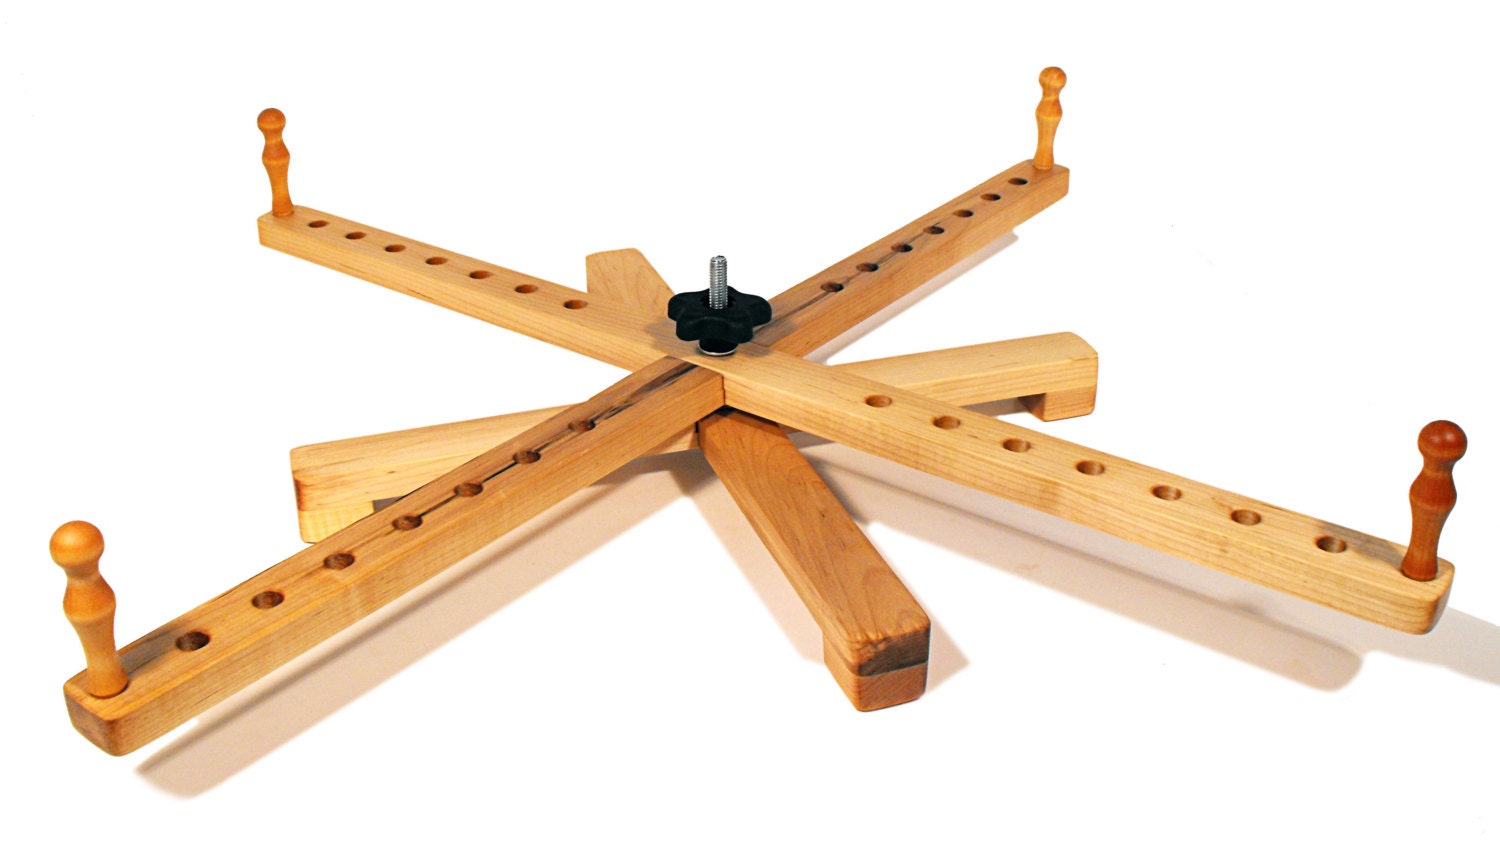 Holst Garn Other knitting tools (033) Yarn Swift Table Top Offer: $42.05